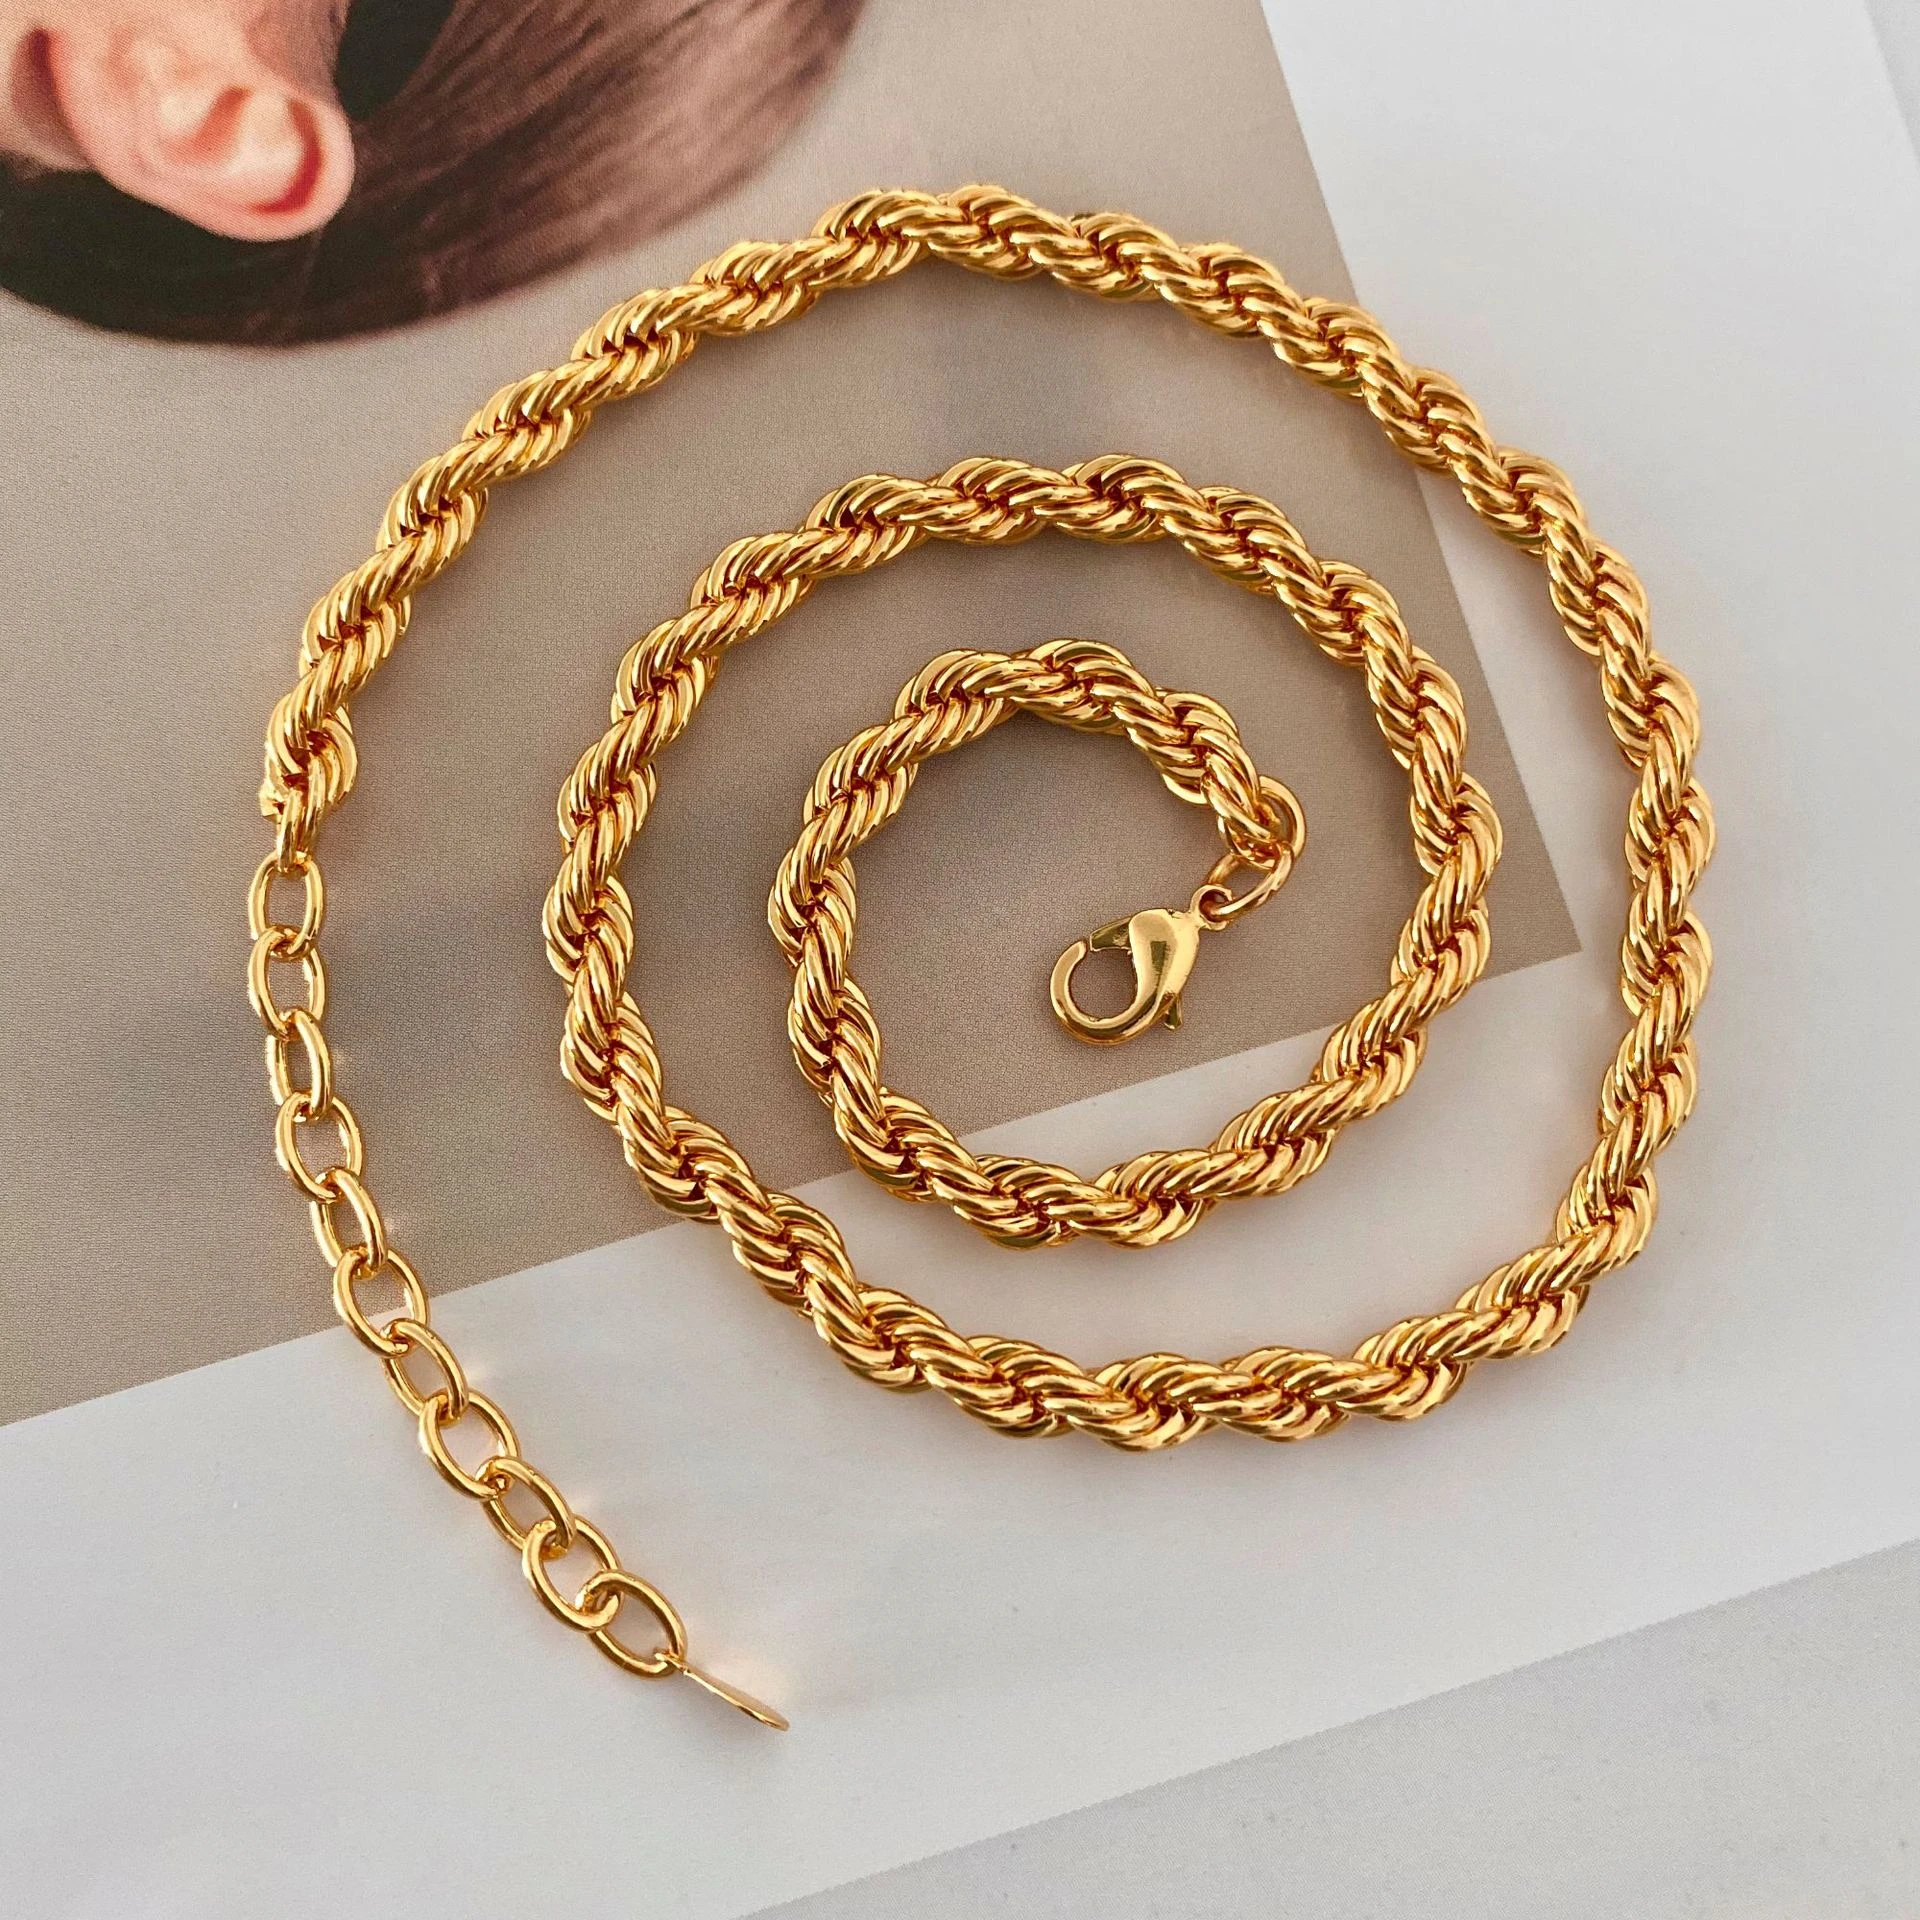 Womens Fashion Dainty 5mm Twisted Chain Necklaces Brass 24K Gold Plated Jewelry 2020 New Design